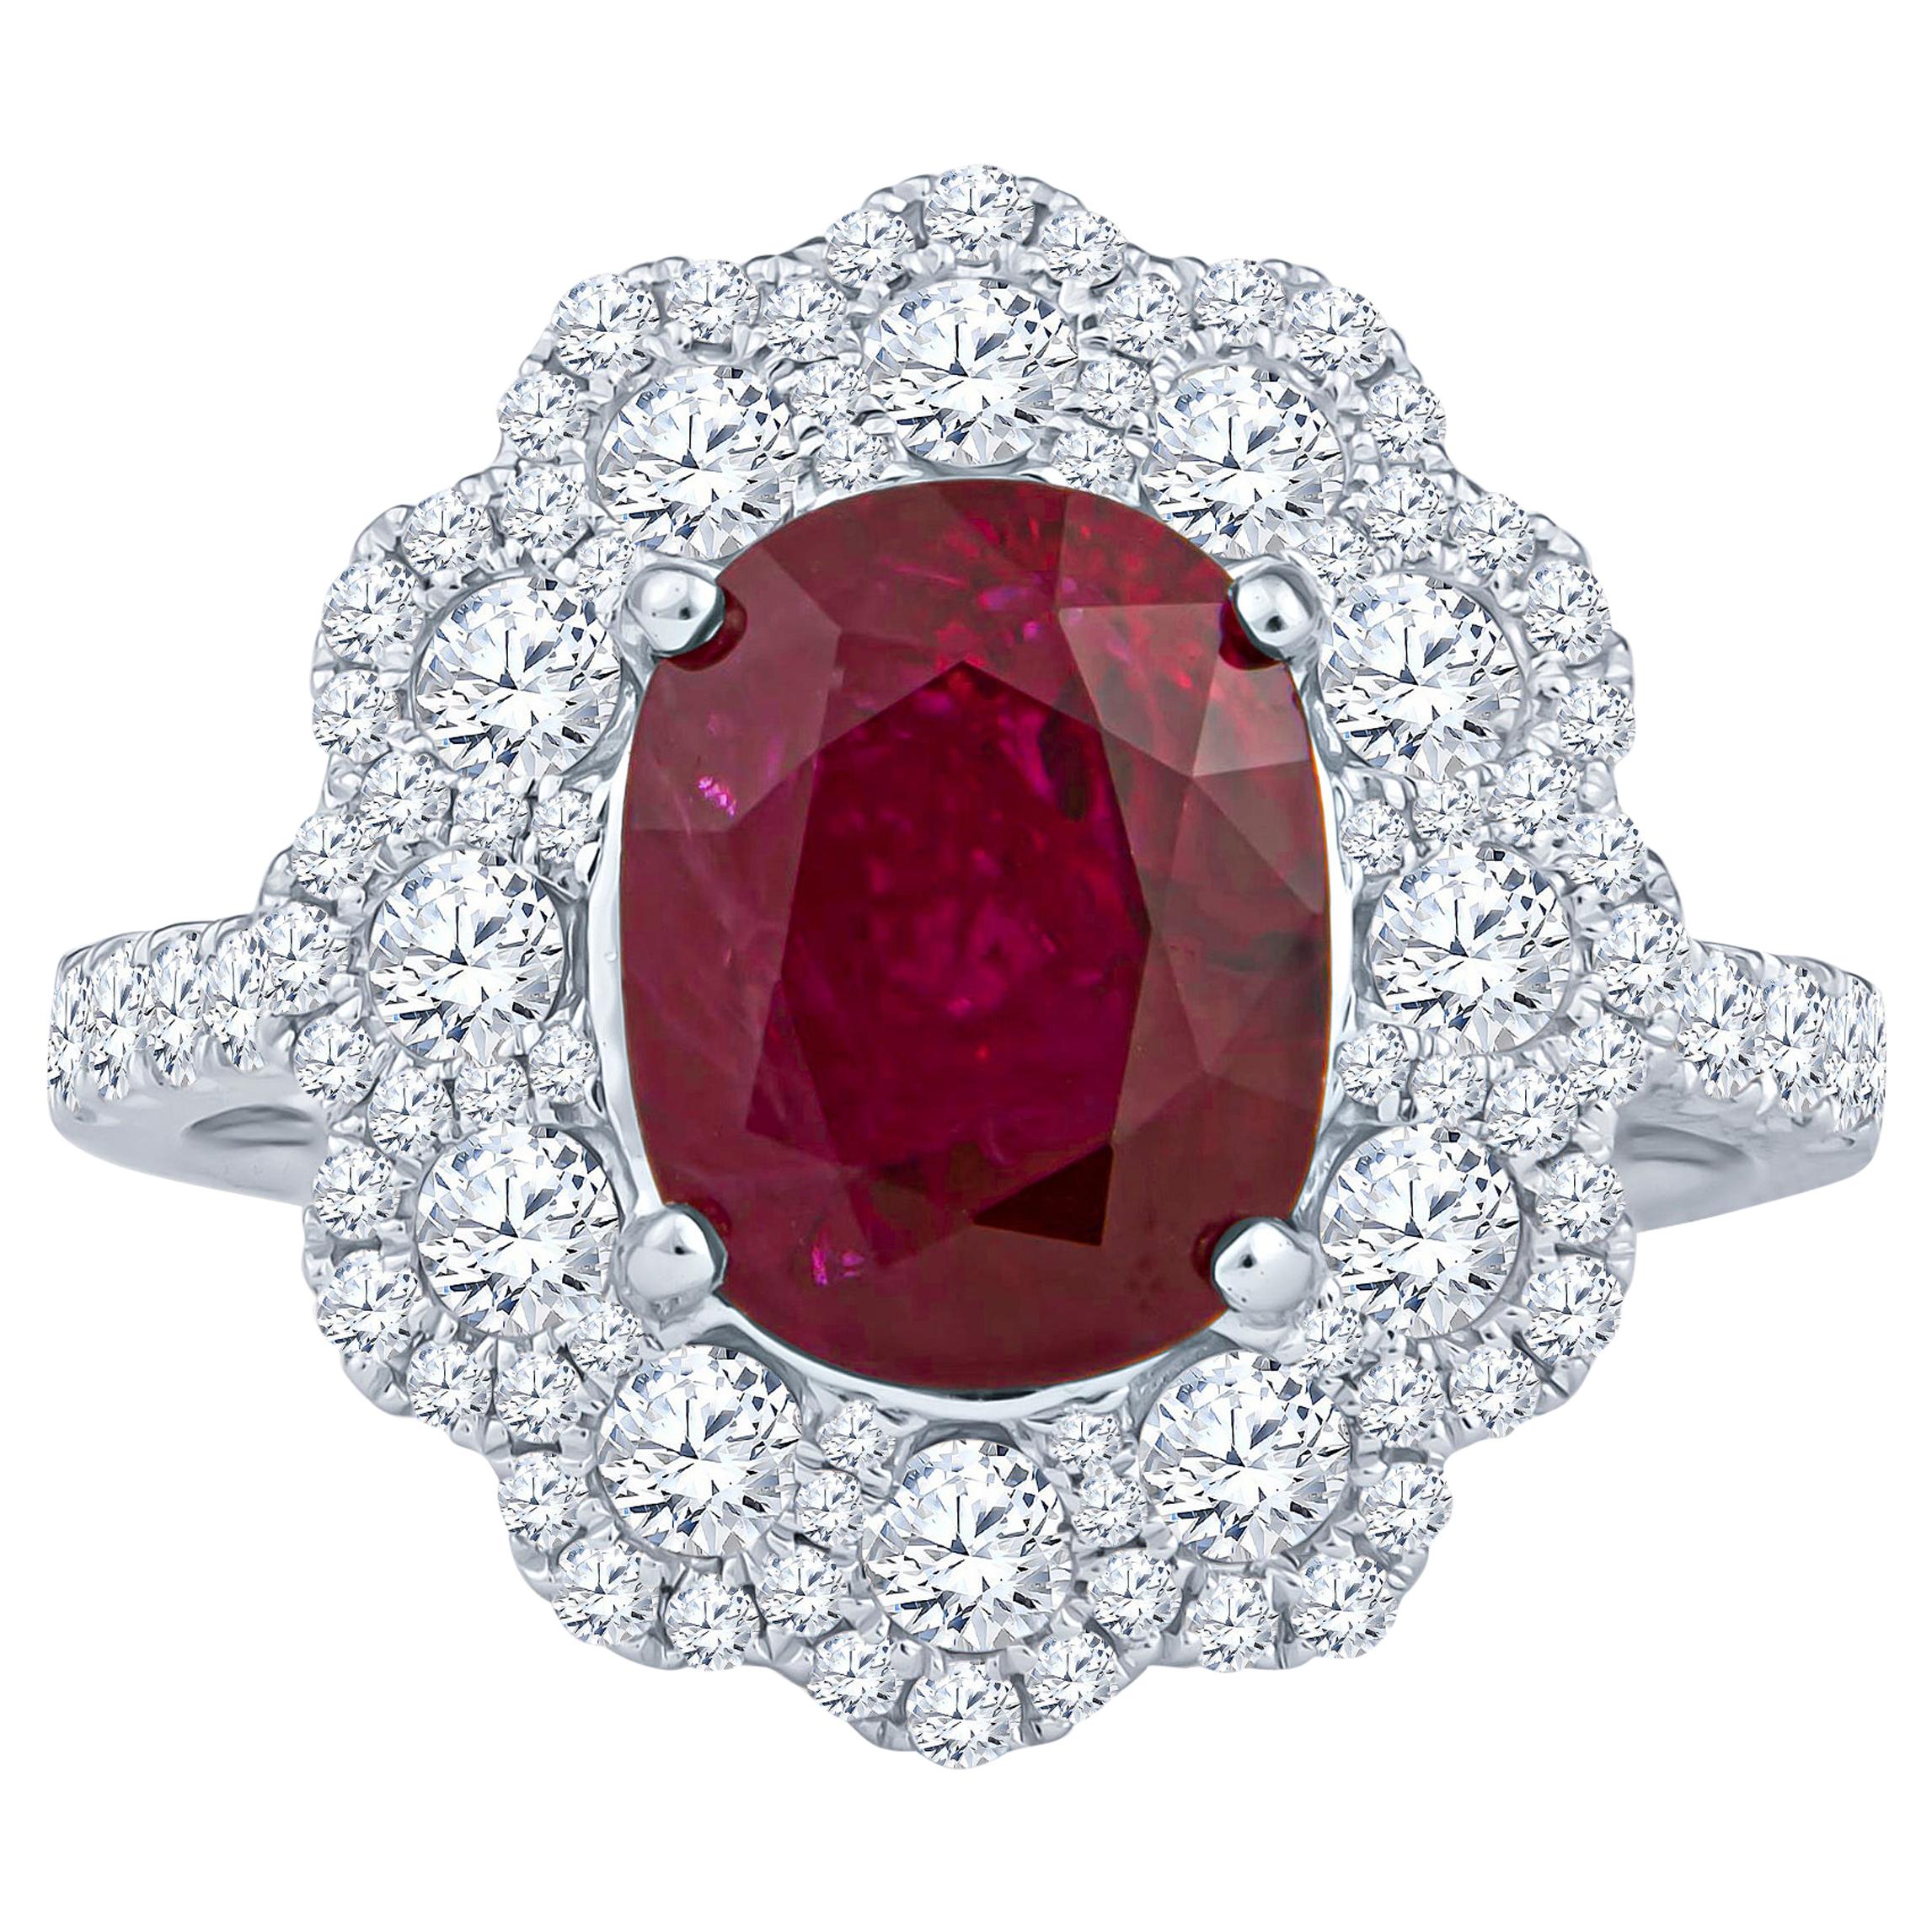 3.41ct Thai Oval Ruby in 18k White Gold and 1.17ct Round Diamonds, GIA Report